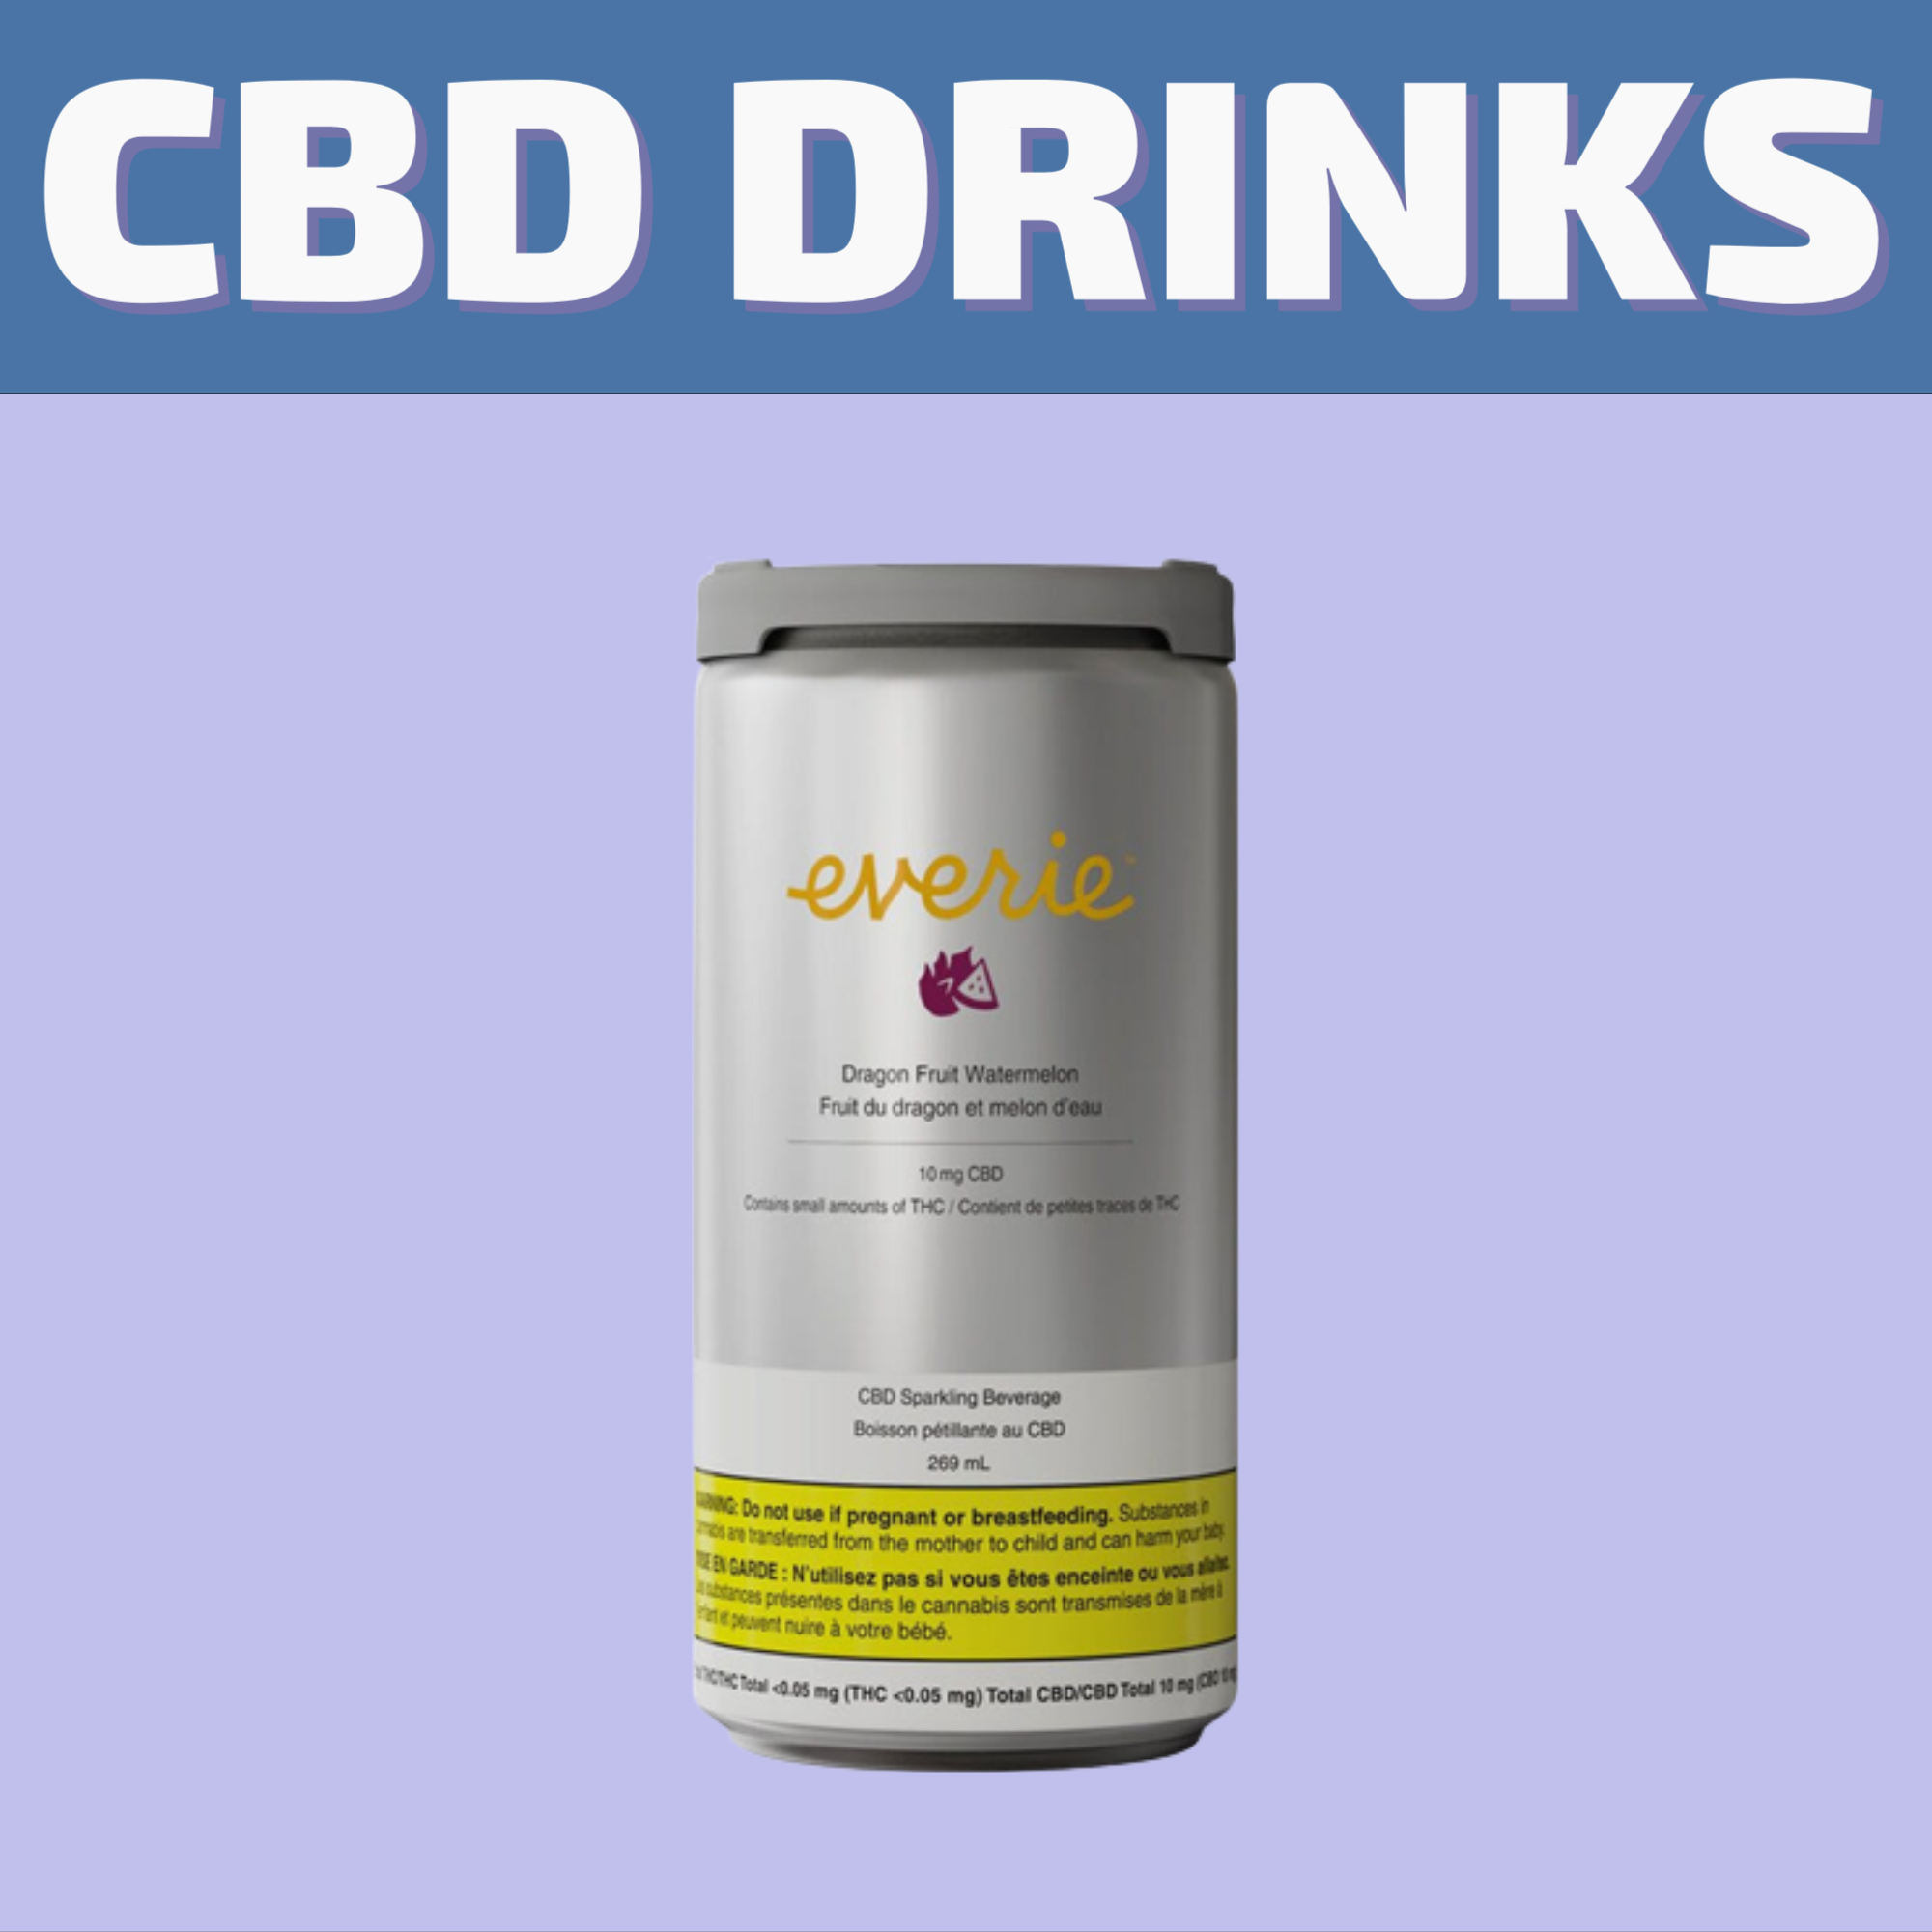 Shop the best selection of CBD Drinks and CBD Oil for same day delivery or pick it up at our dispensary on 580 Academy Road.  